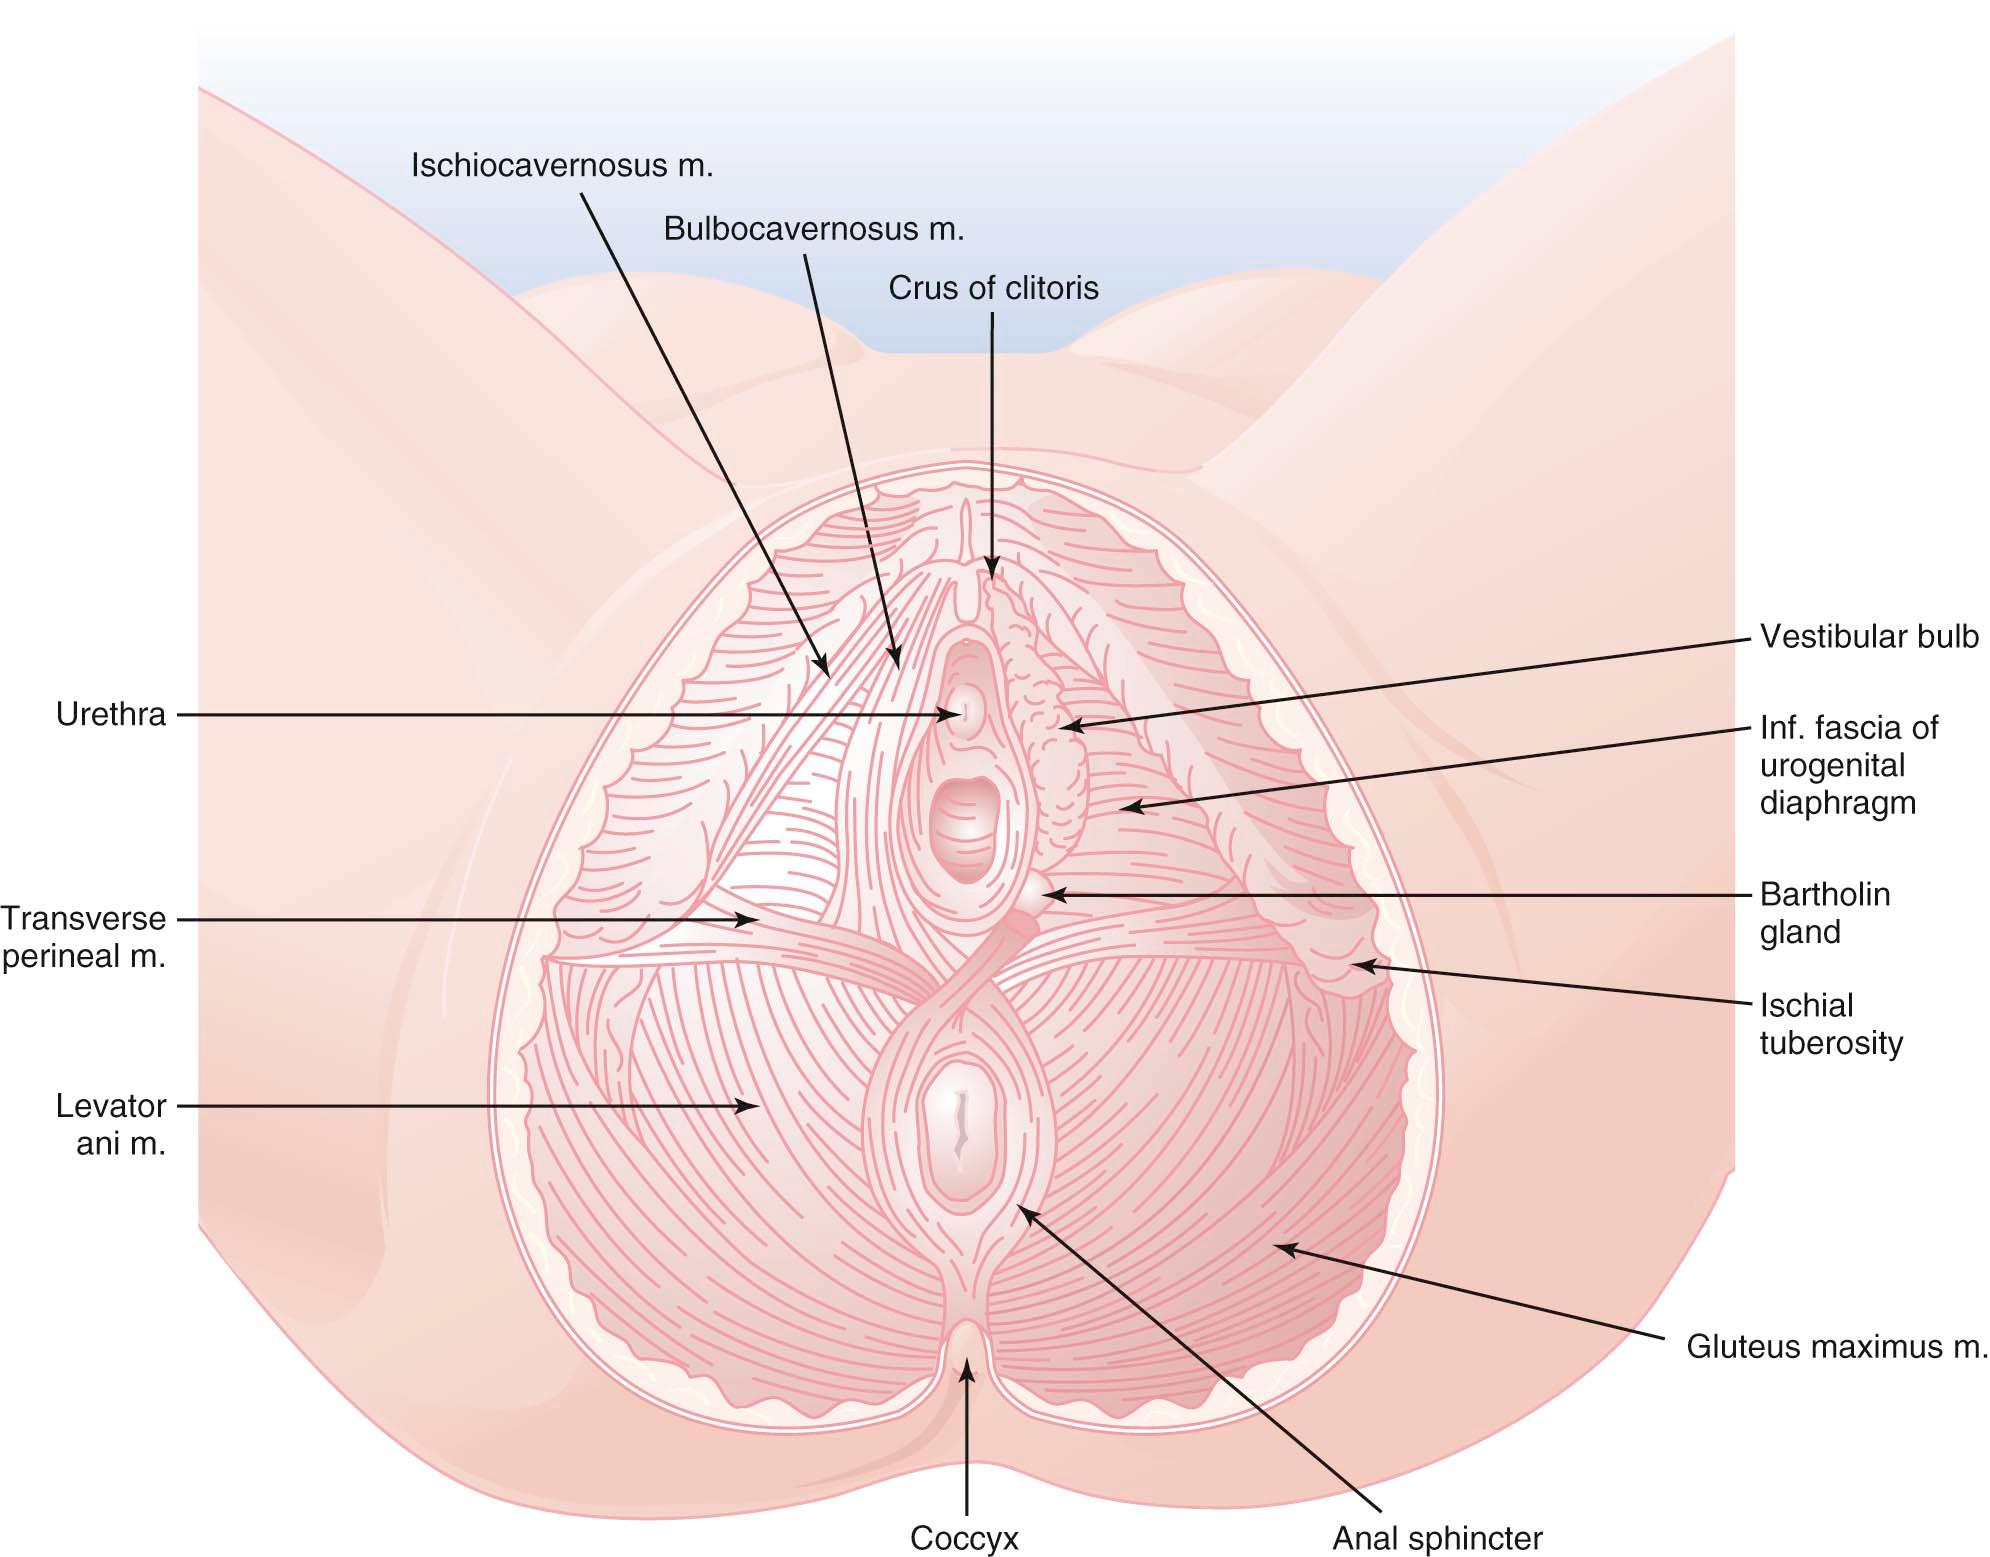 FIGURE 3-2, The perineum, showing superficial structures on the left and deeper structures on the right.